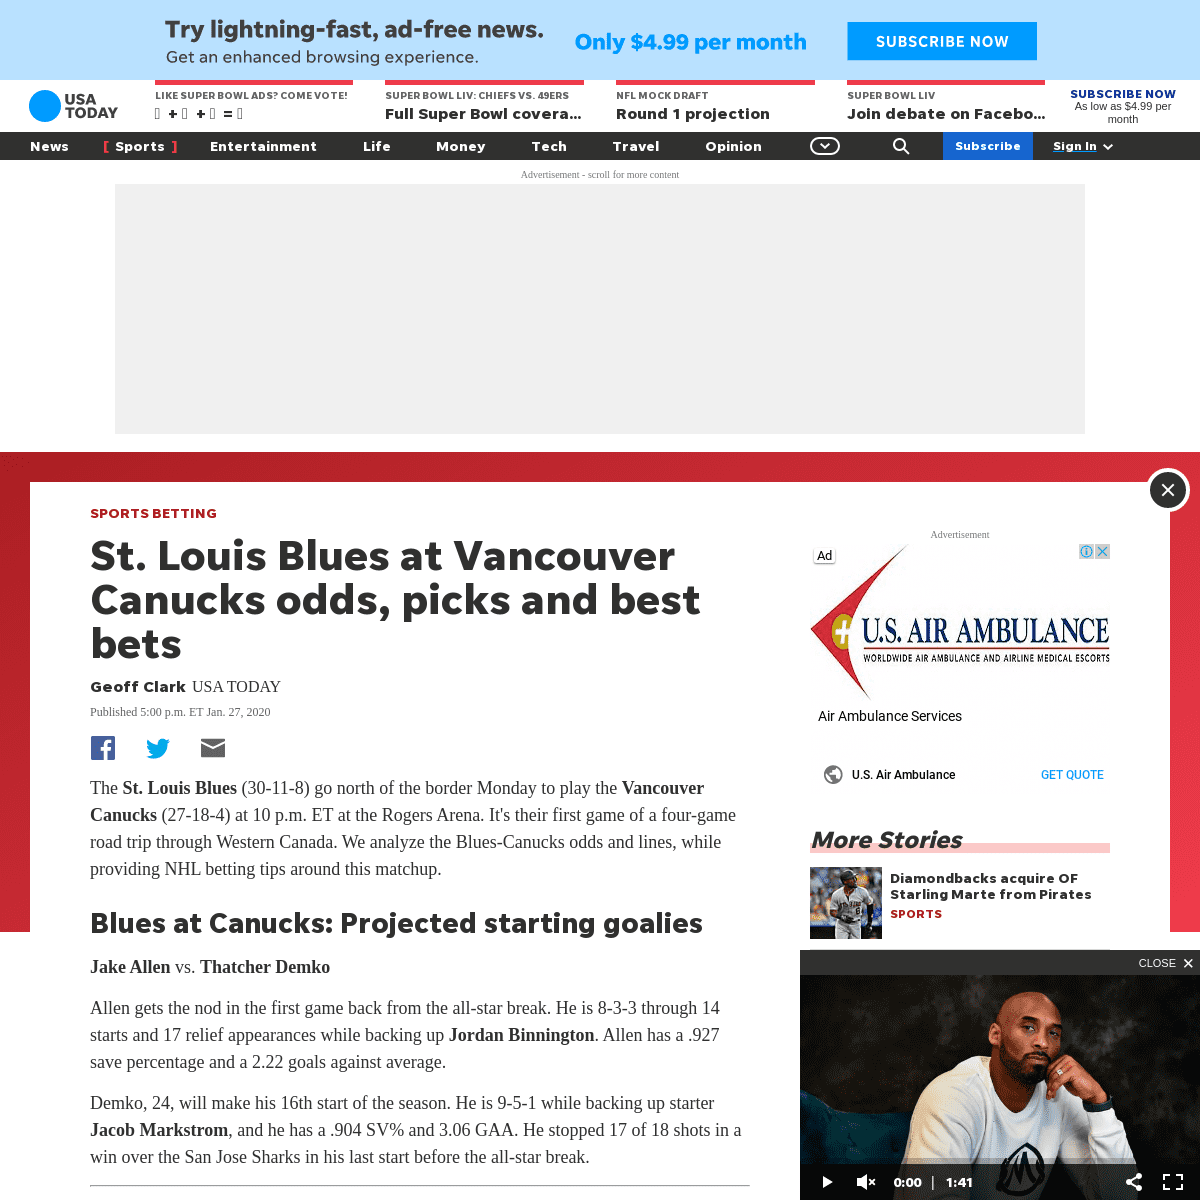 A complete backup of www.usatoday.com/story/sports/sports-betting/2020/01/27/st-louis-blues-at-vancouver-canucks-odds-picks-and-